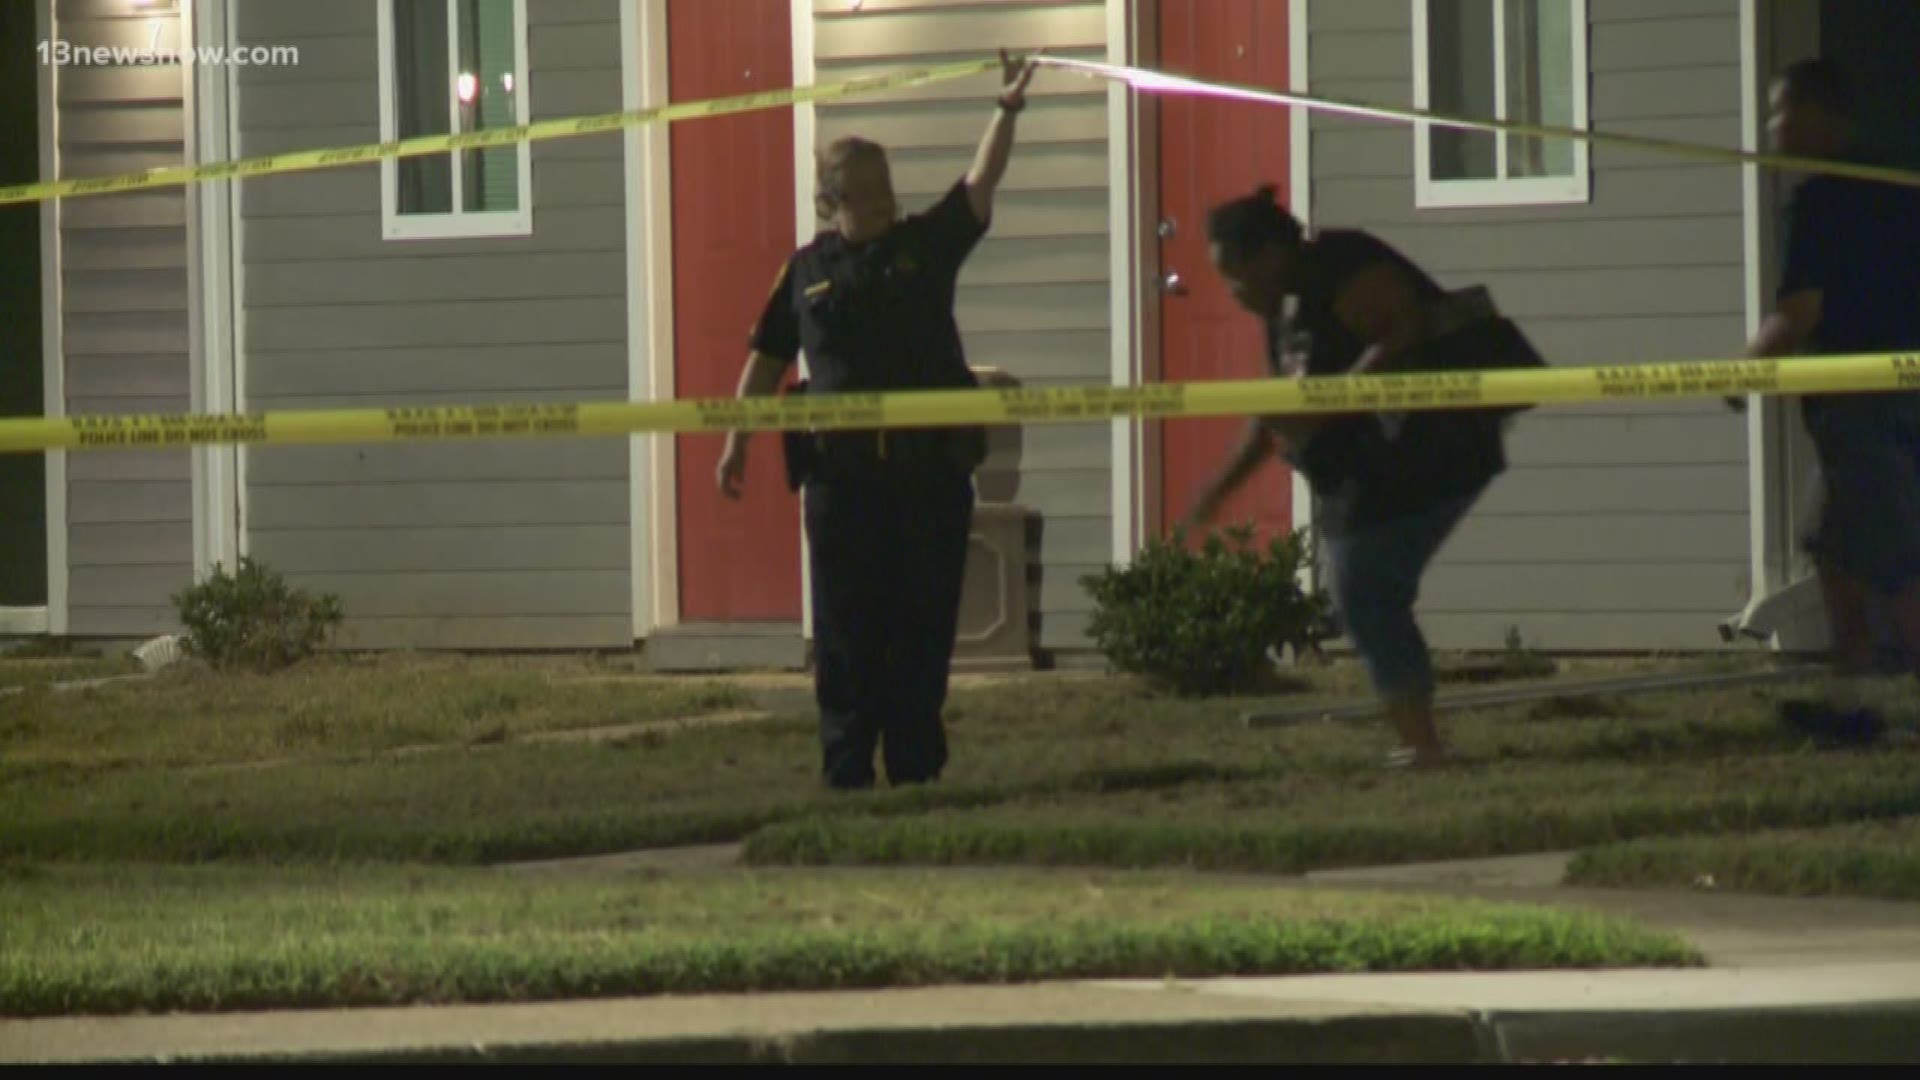 Two people were seriously hurt after a shooting on Teardrop Lane.